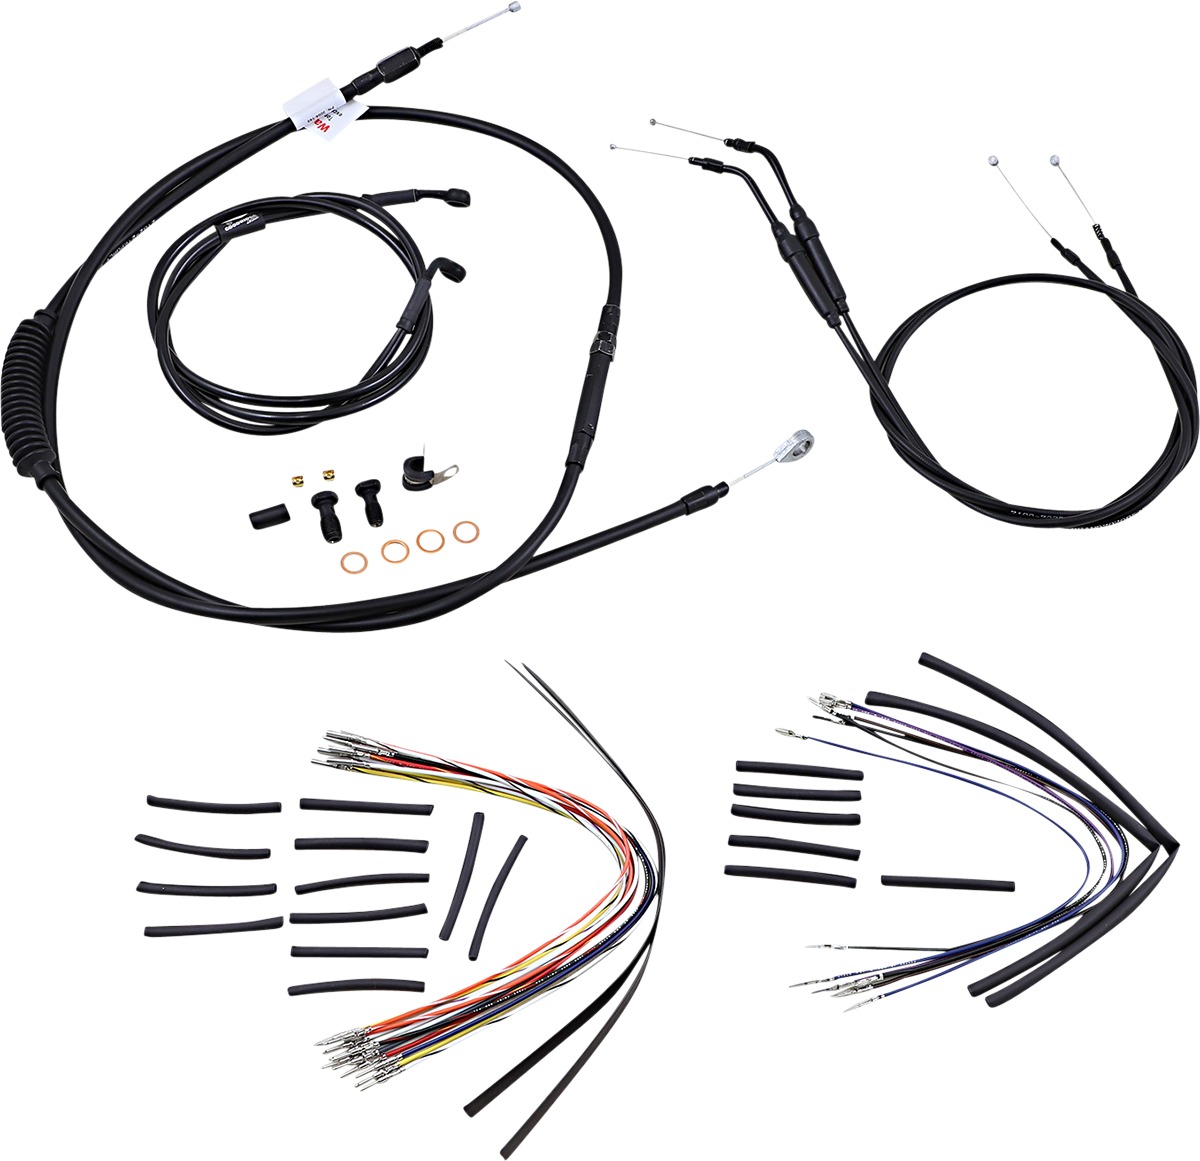 Extended Black Control Cable Kit For Dynas - 14" tall bars - Click Image to Close